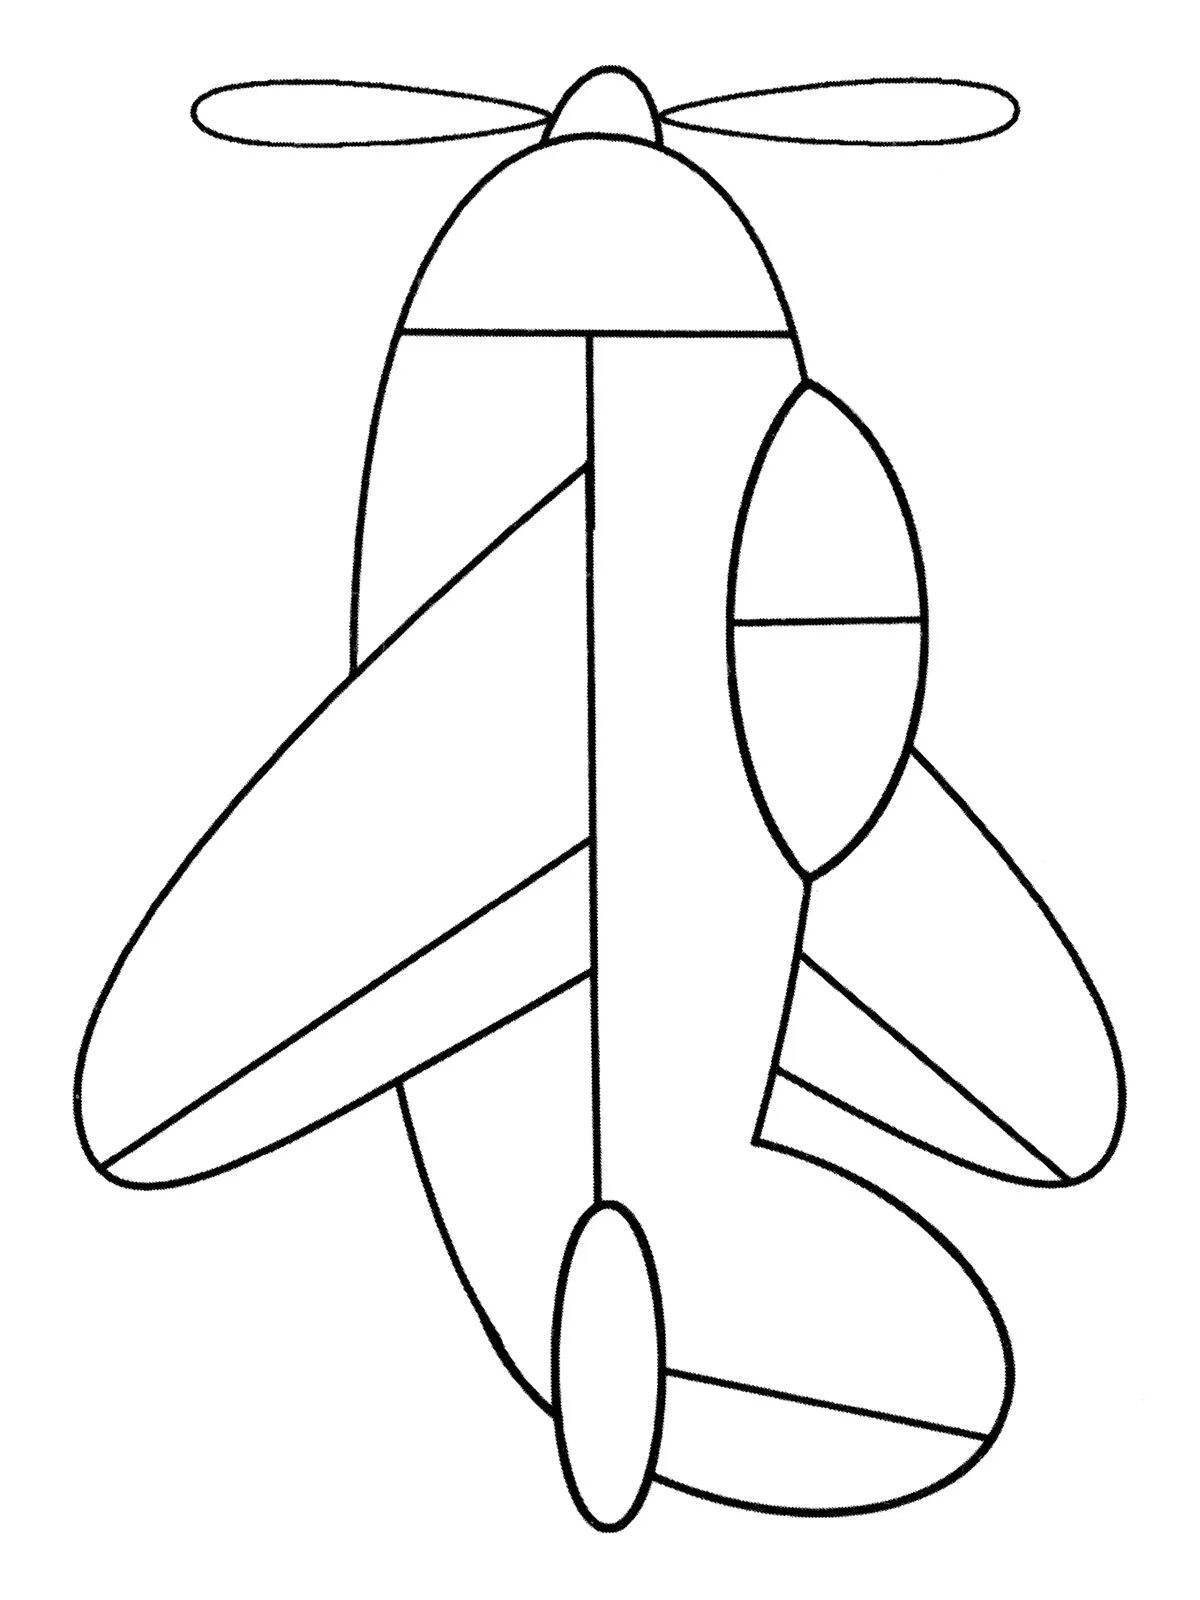 Fun coloring pages with airplanes for kids 5-6 years old